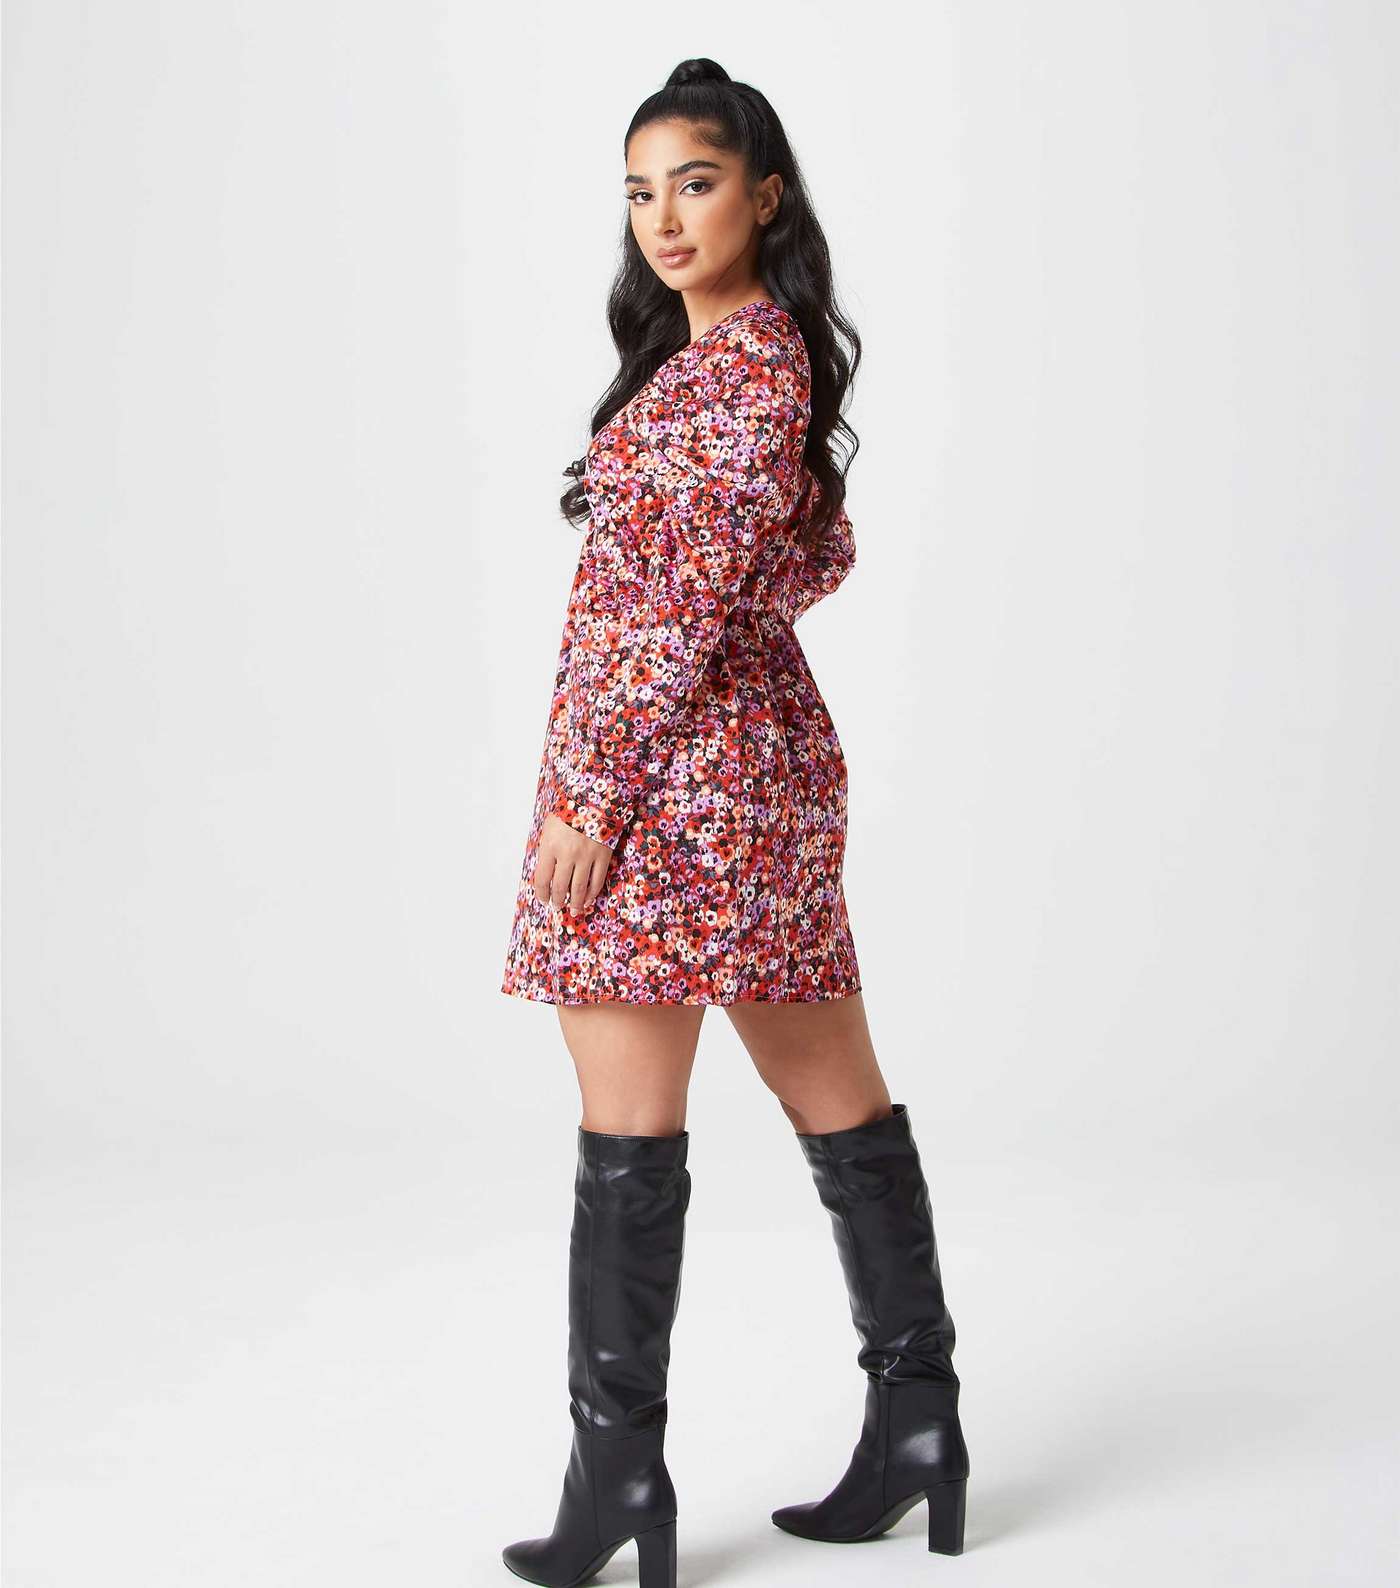 Urban Bliss Red Floral Empire Mini Dress Image 2